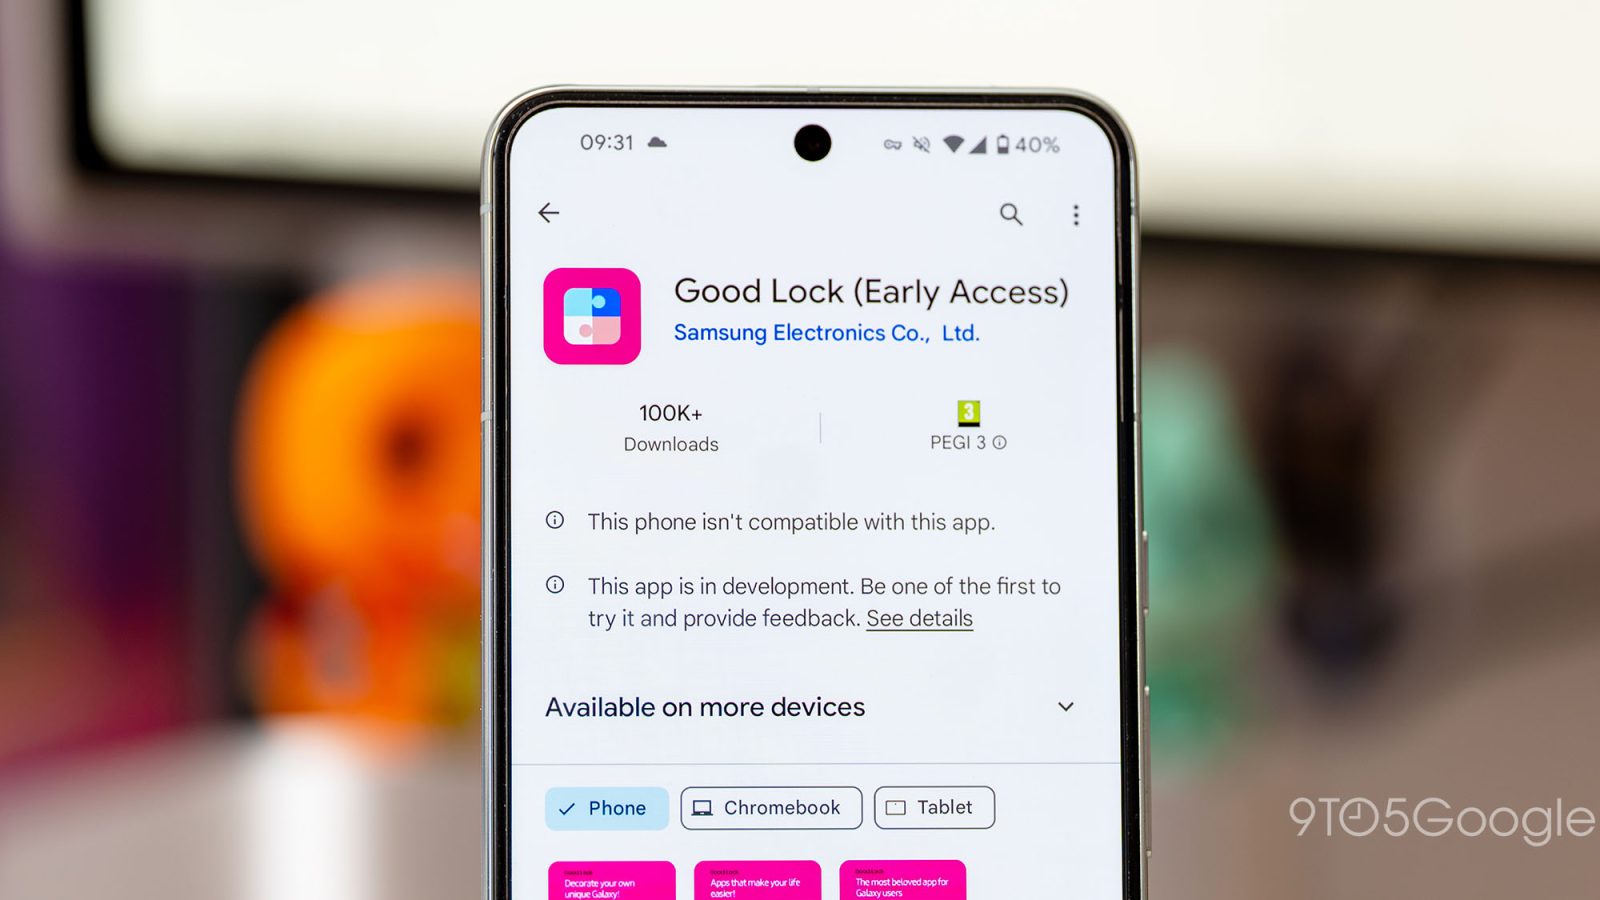 Samsung Good Lock app now available on Play Store